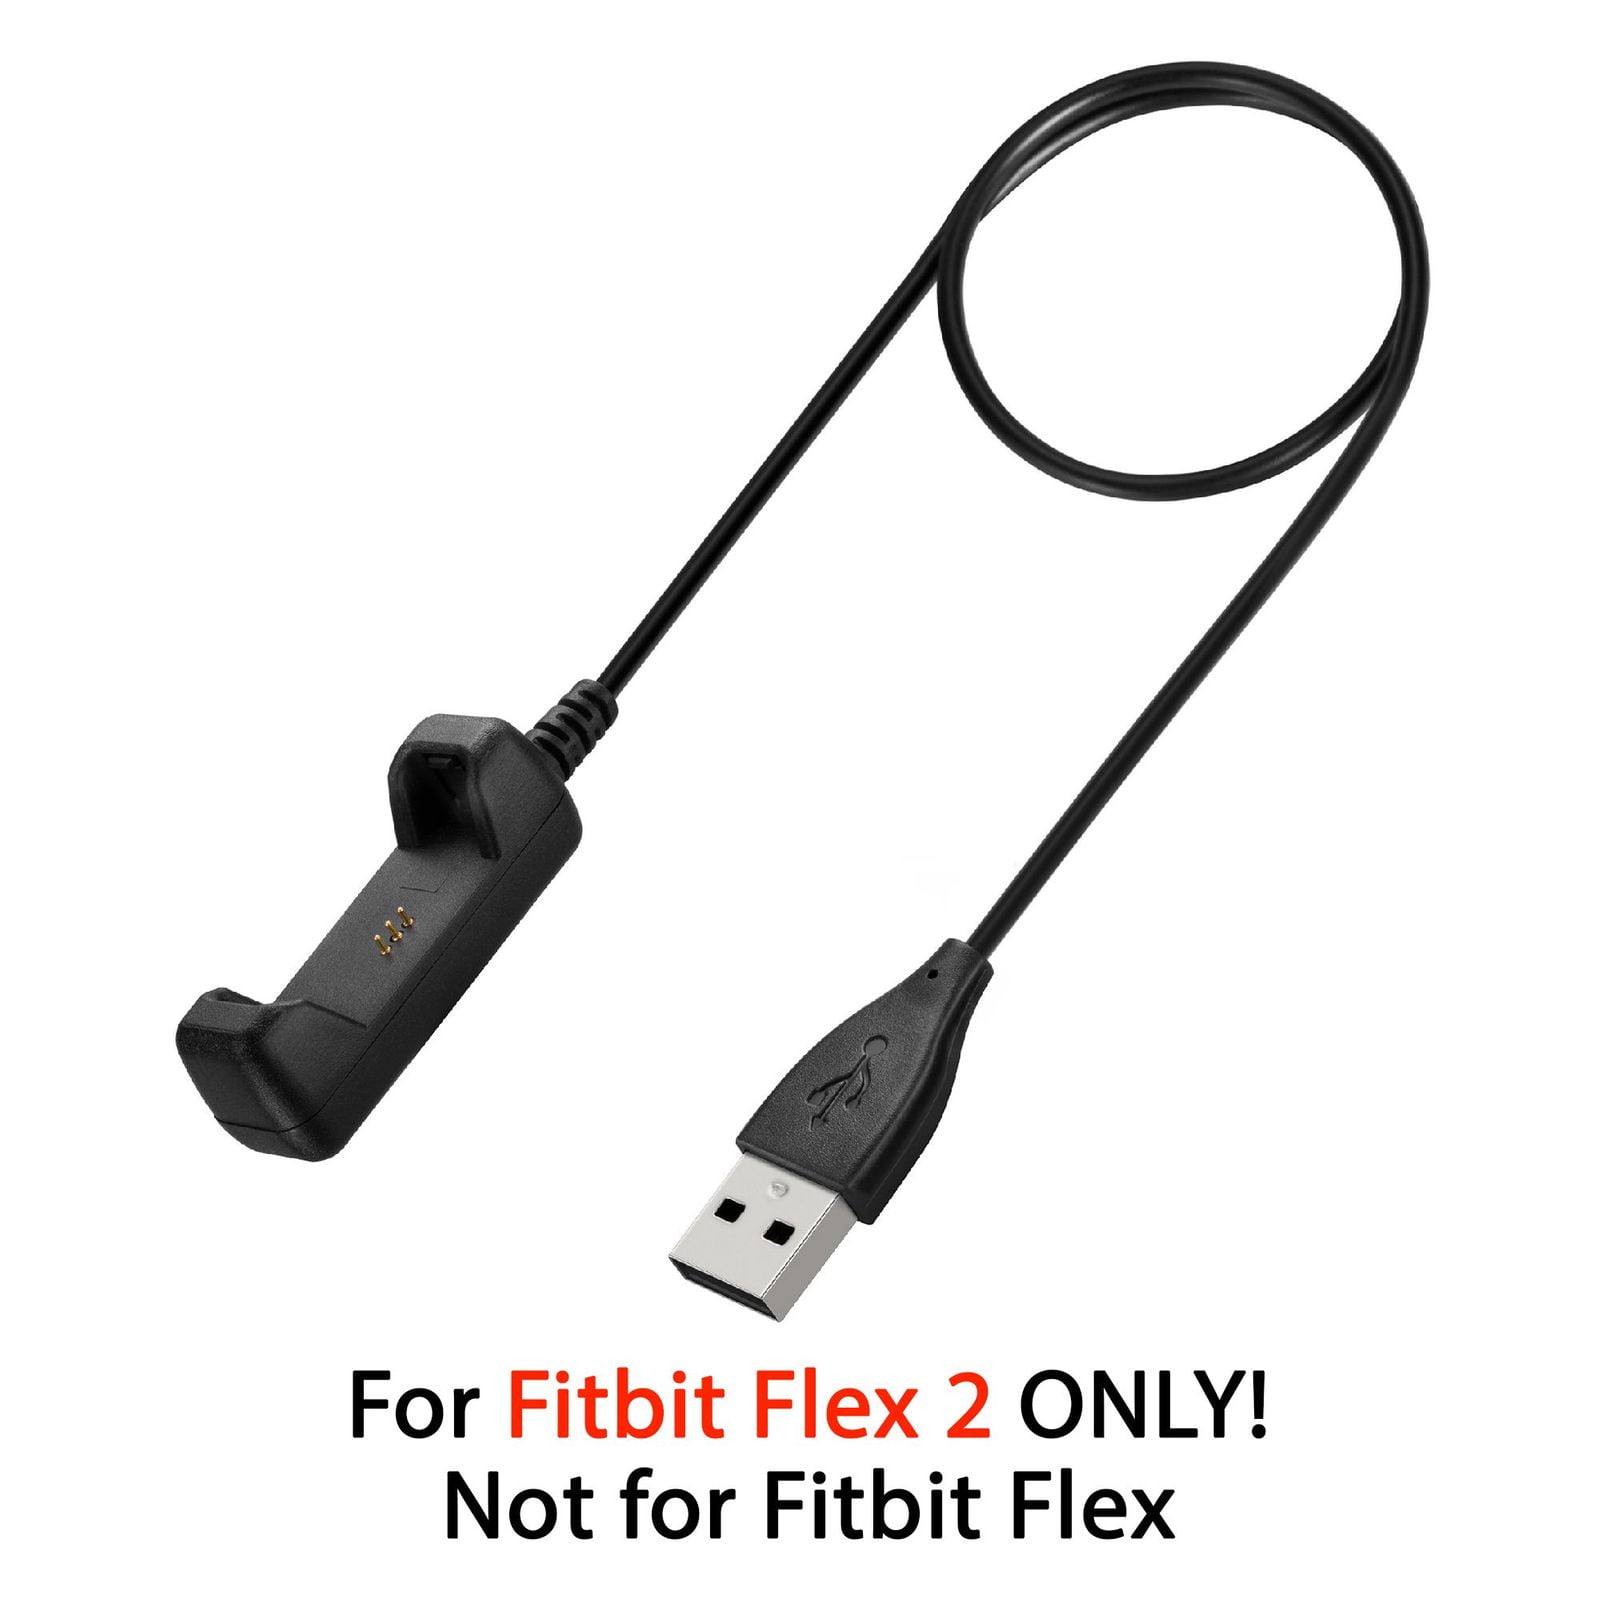 USB Charger Cable Cord Charging For Fitbit Flex 2 Tracker Wristband 